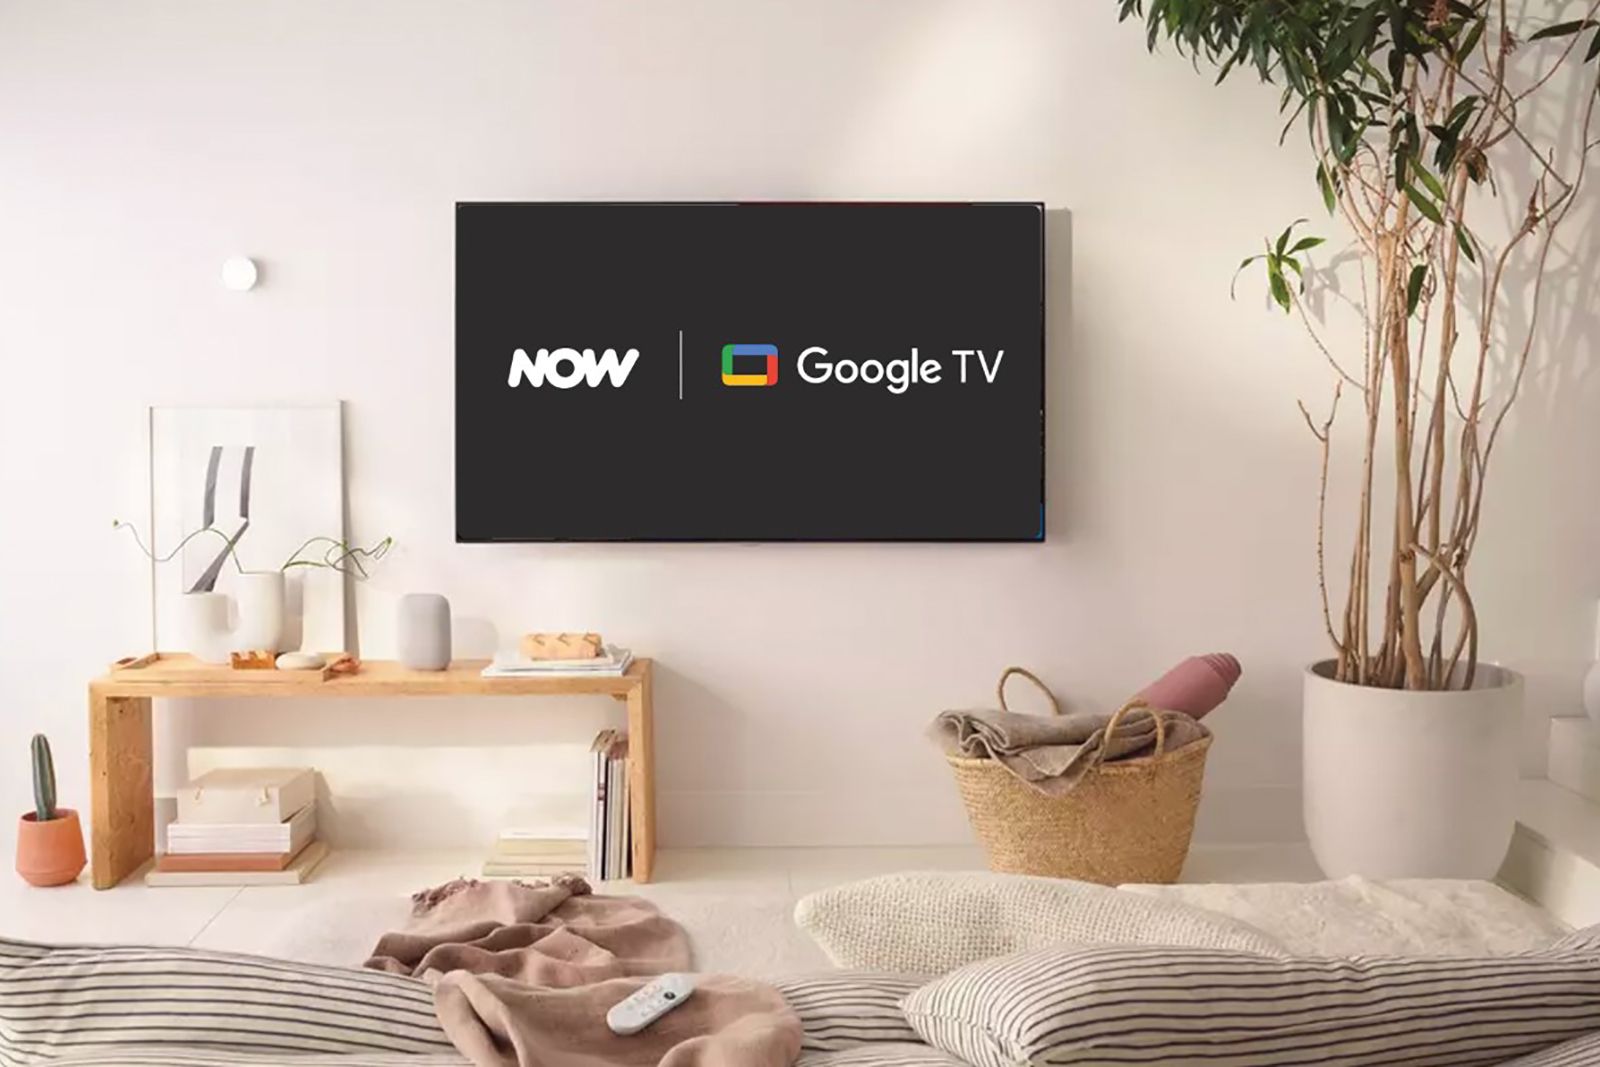 Now finally comes to Android TVs and devices, plus Google TV photo 1